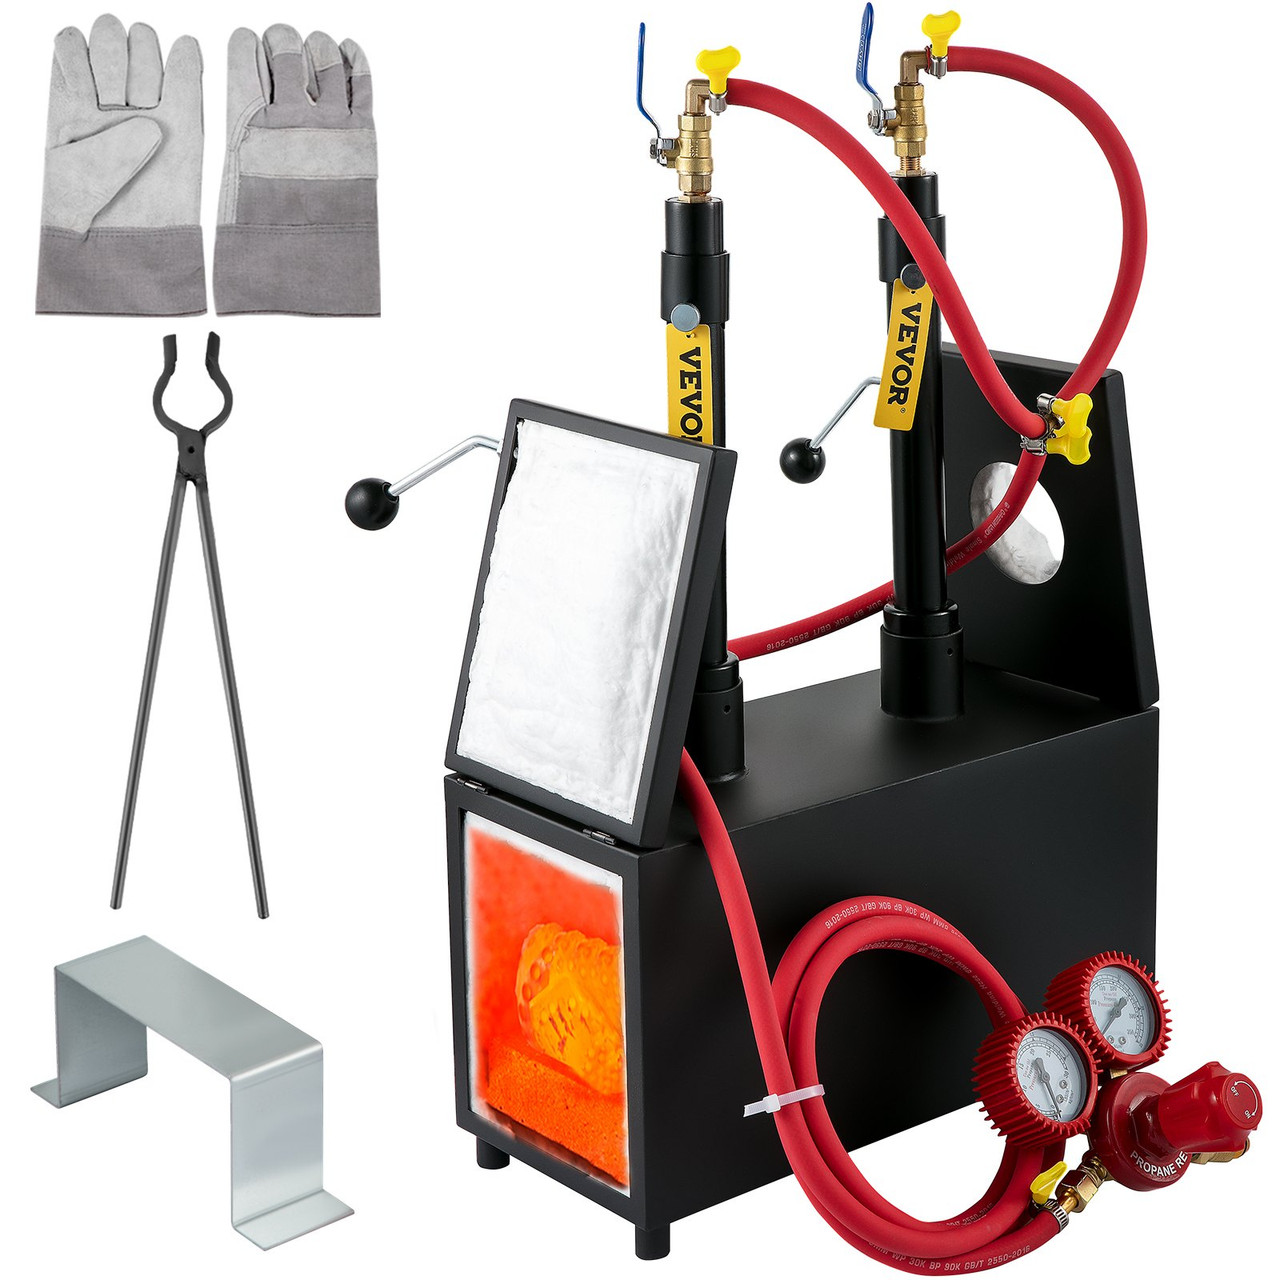 Propane Knife Forge, Farrier Furnace with Dual Burners, Portable Square Metal Forge with Two Durable Doors, Large Capacity, for Blacksmithing, Knife Making, Forging Tools and Equipment